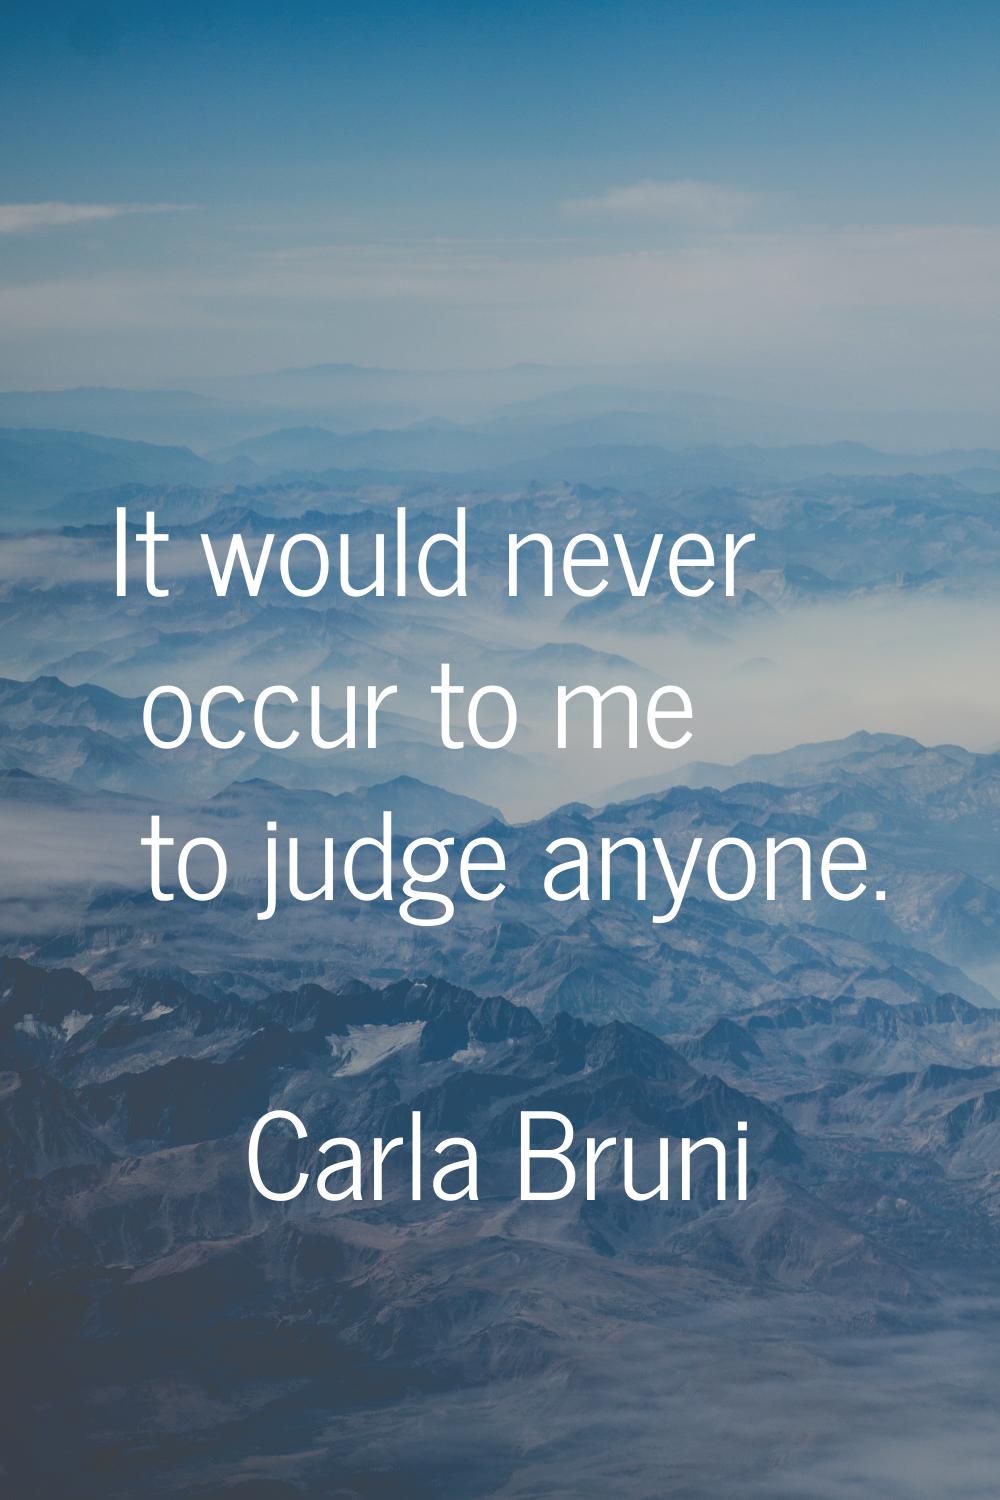 It would never occur to me to judge anyone.